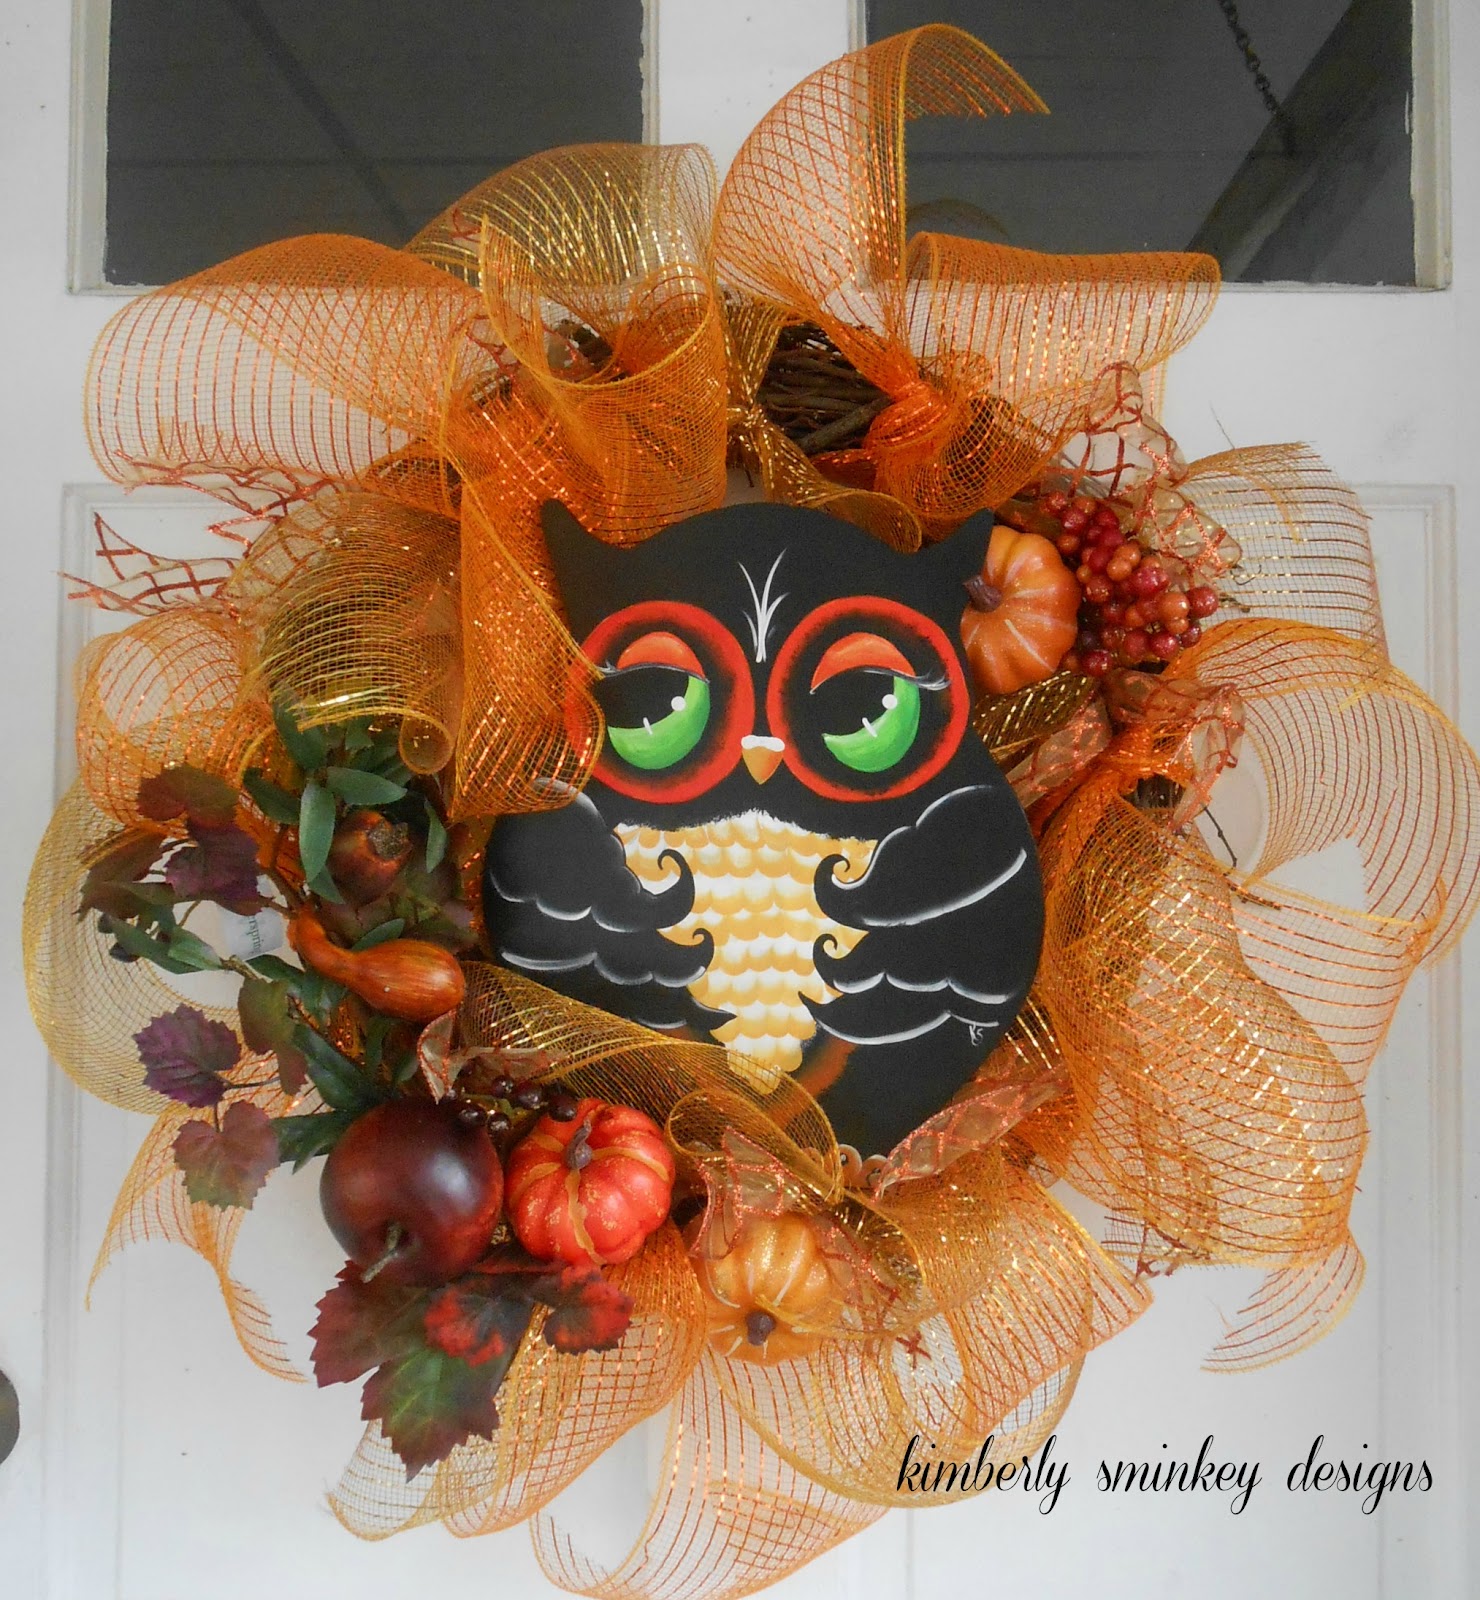 Tiaras and Bowties: It's All about Owl - cute wreath!